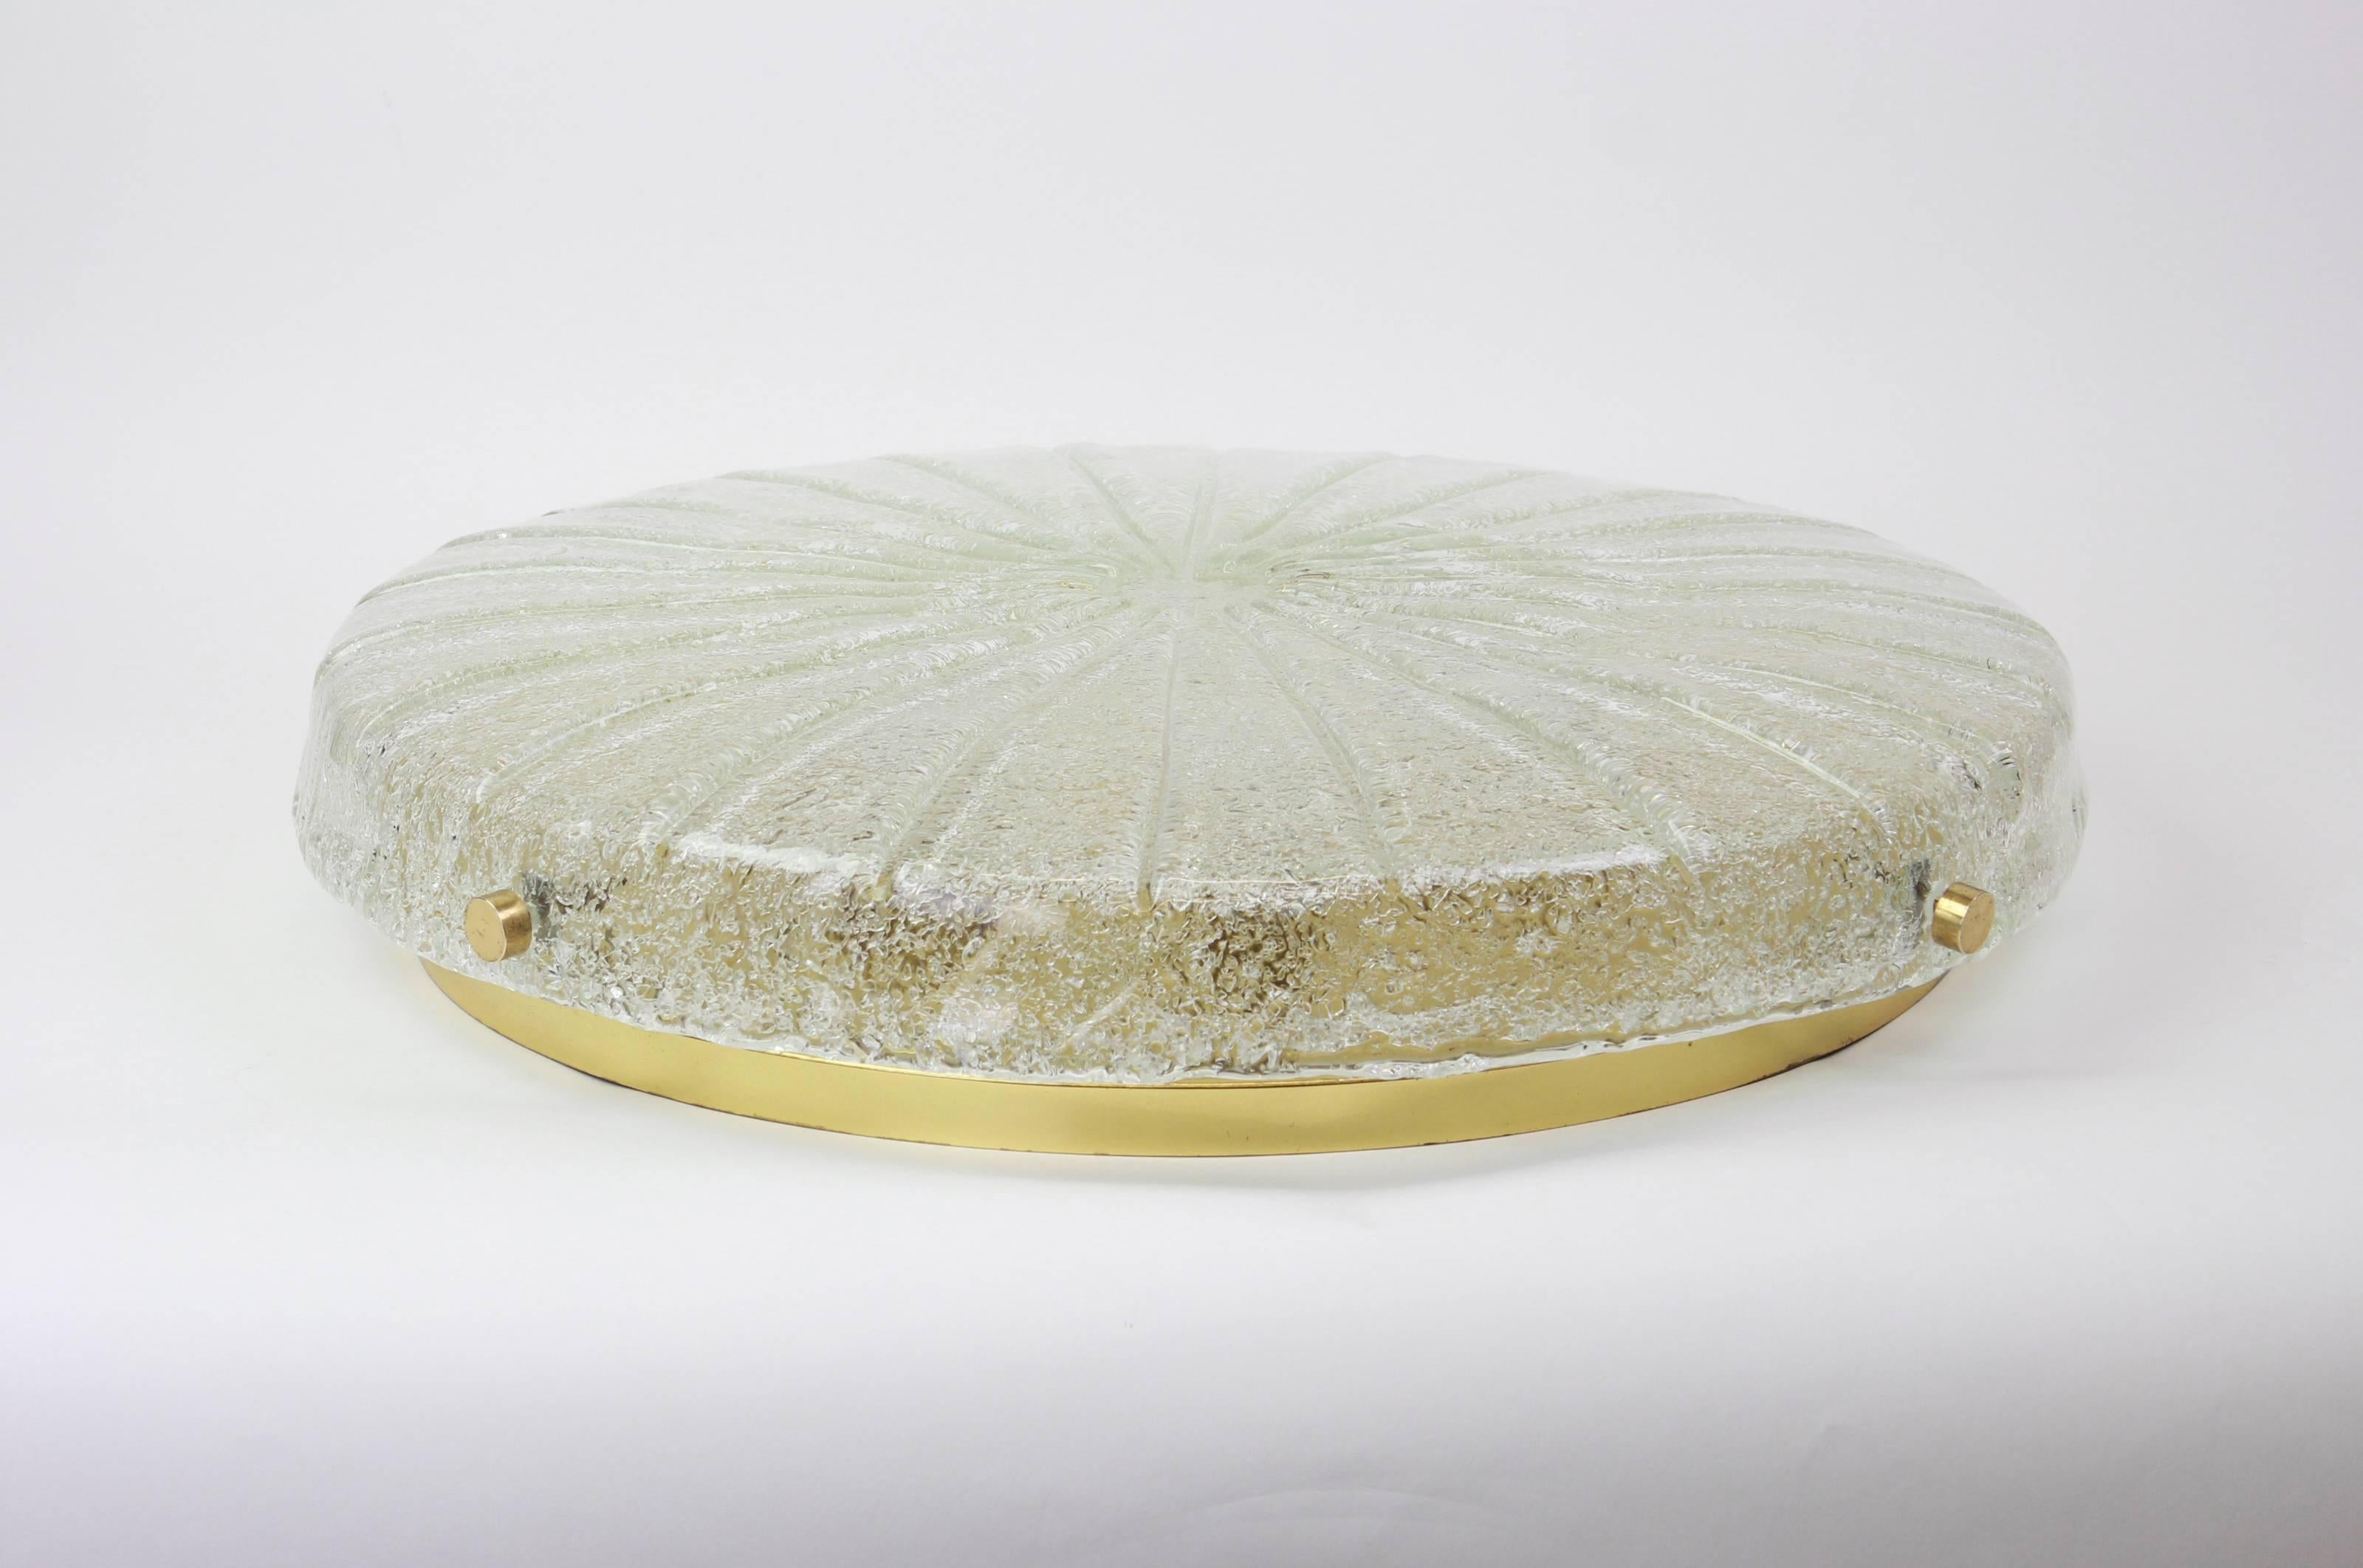 A wonderful round ice glass flush mount by Hillebrand Leuchten, Germany, 1970s.
Thick textured ice glass fixture on a brass base.

High quality and in very good condition. Cleaned, well-wired and ready to use. 

The fixture requires 6 x E14 Standard